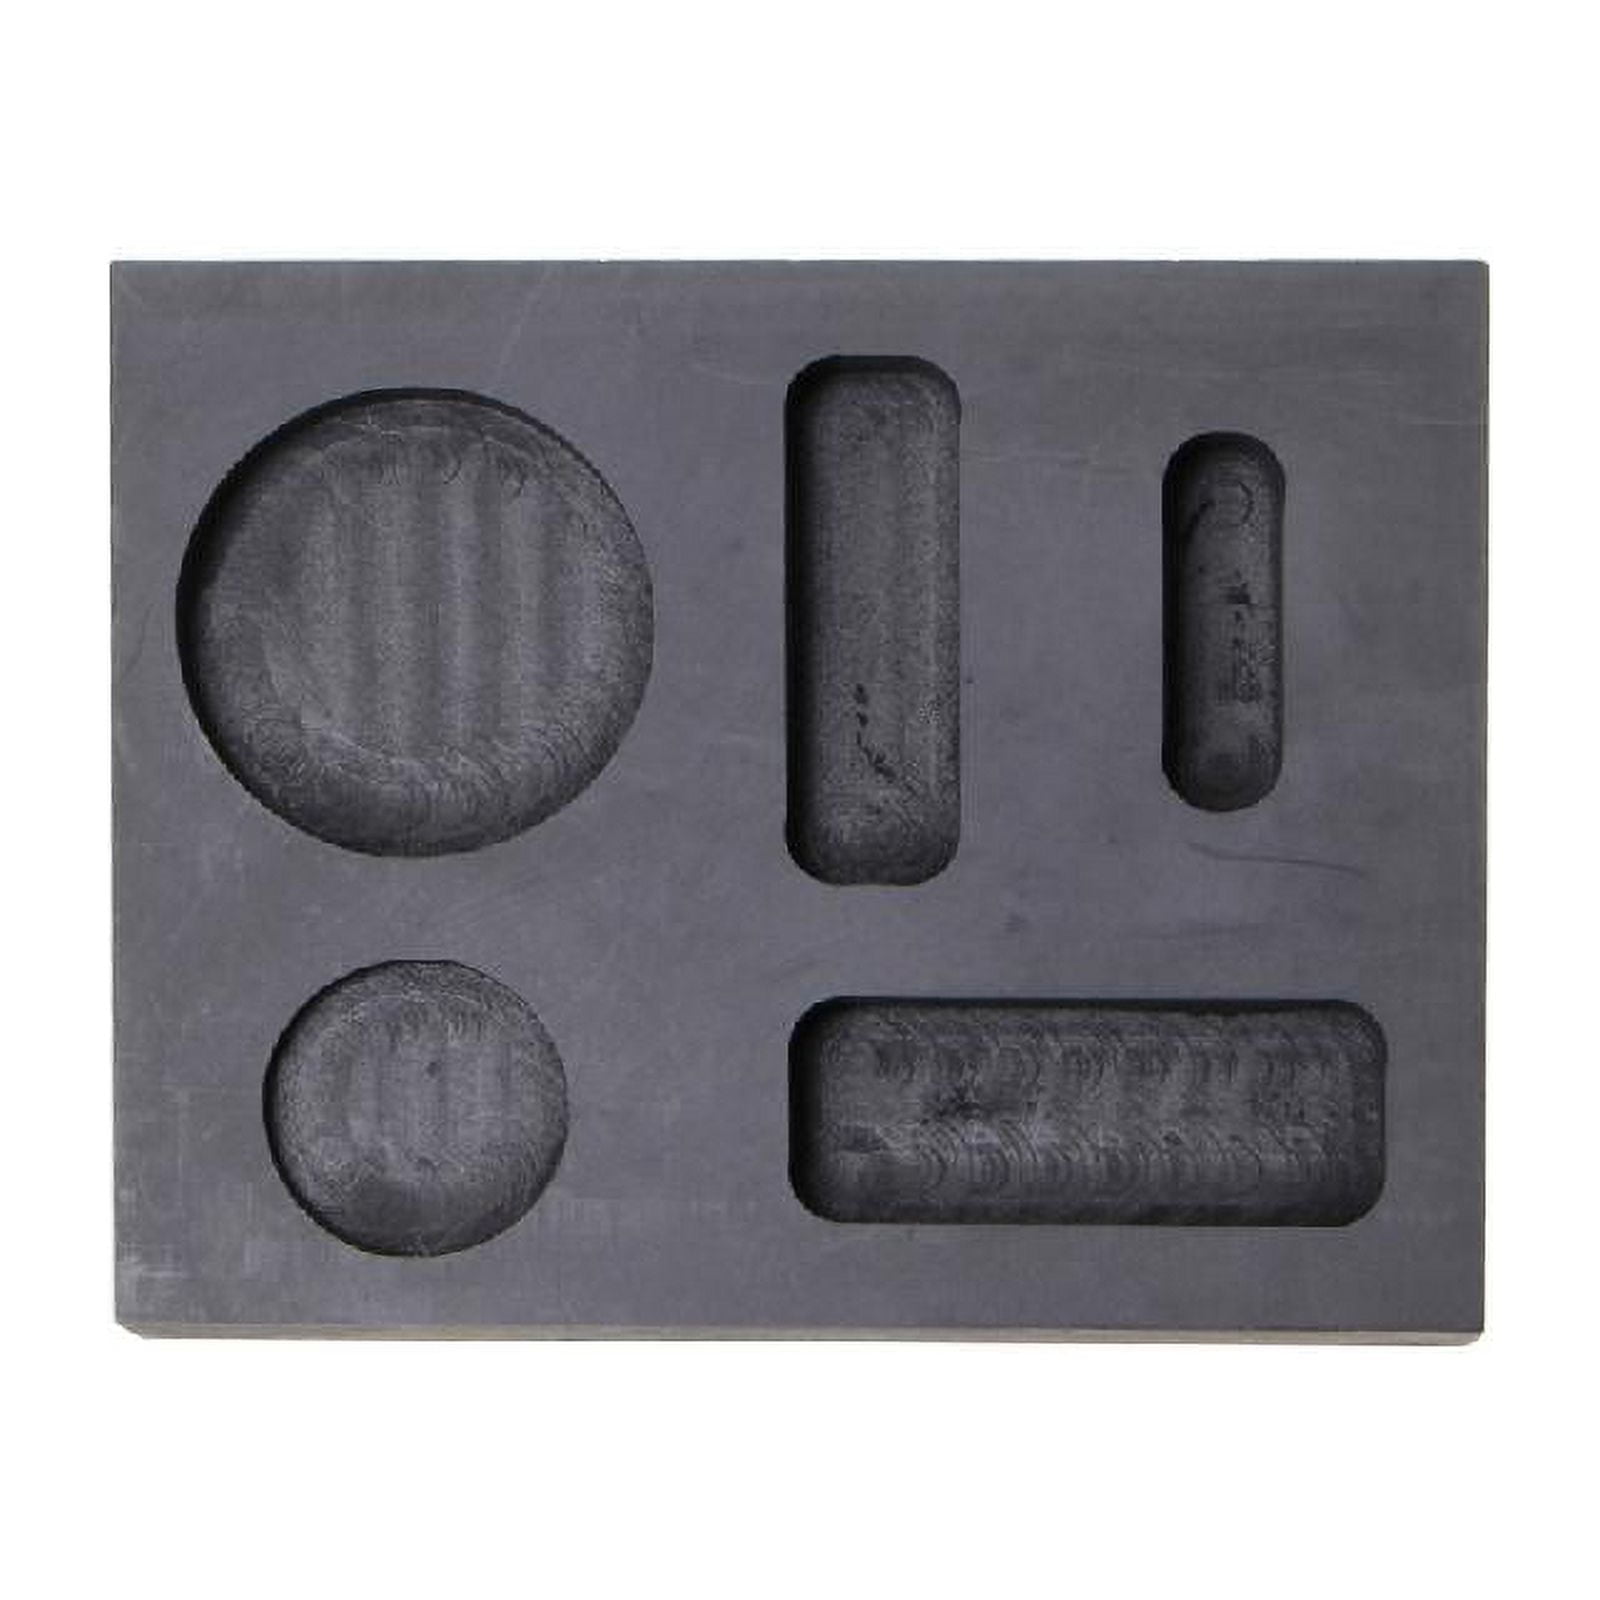 Graphite Metal Casting Foundry Crucible Melting Tool 1,2,4,6,8,10,12,14,16  Kg Gold Silver Melting Scrap Cast Tool various 